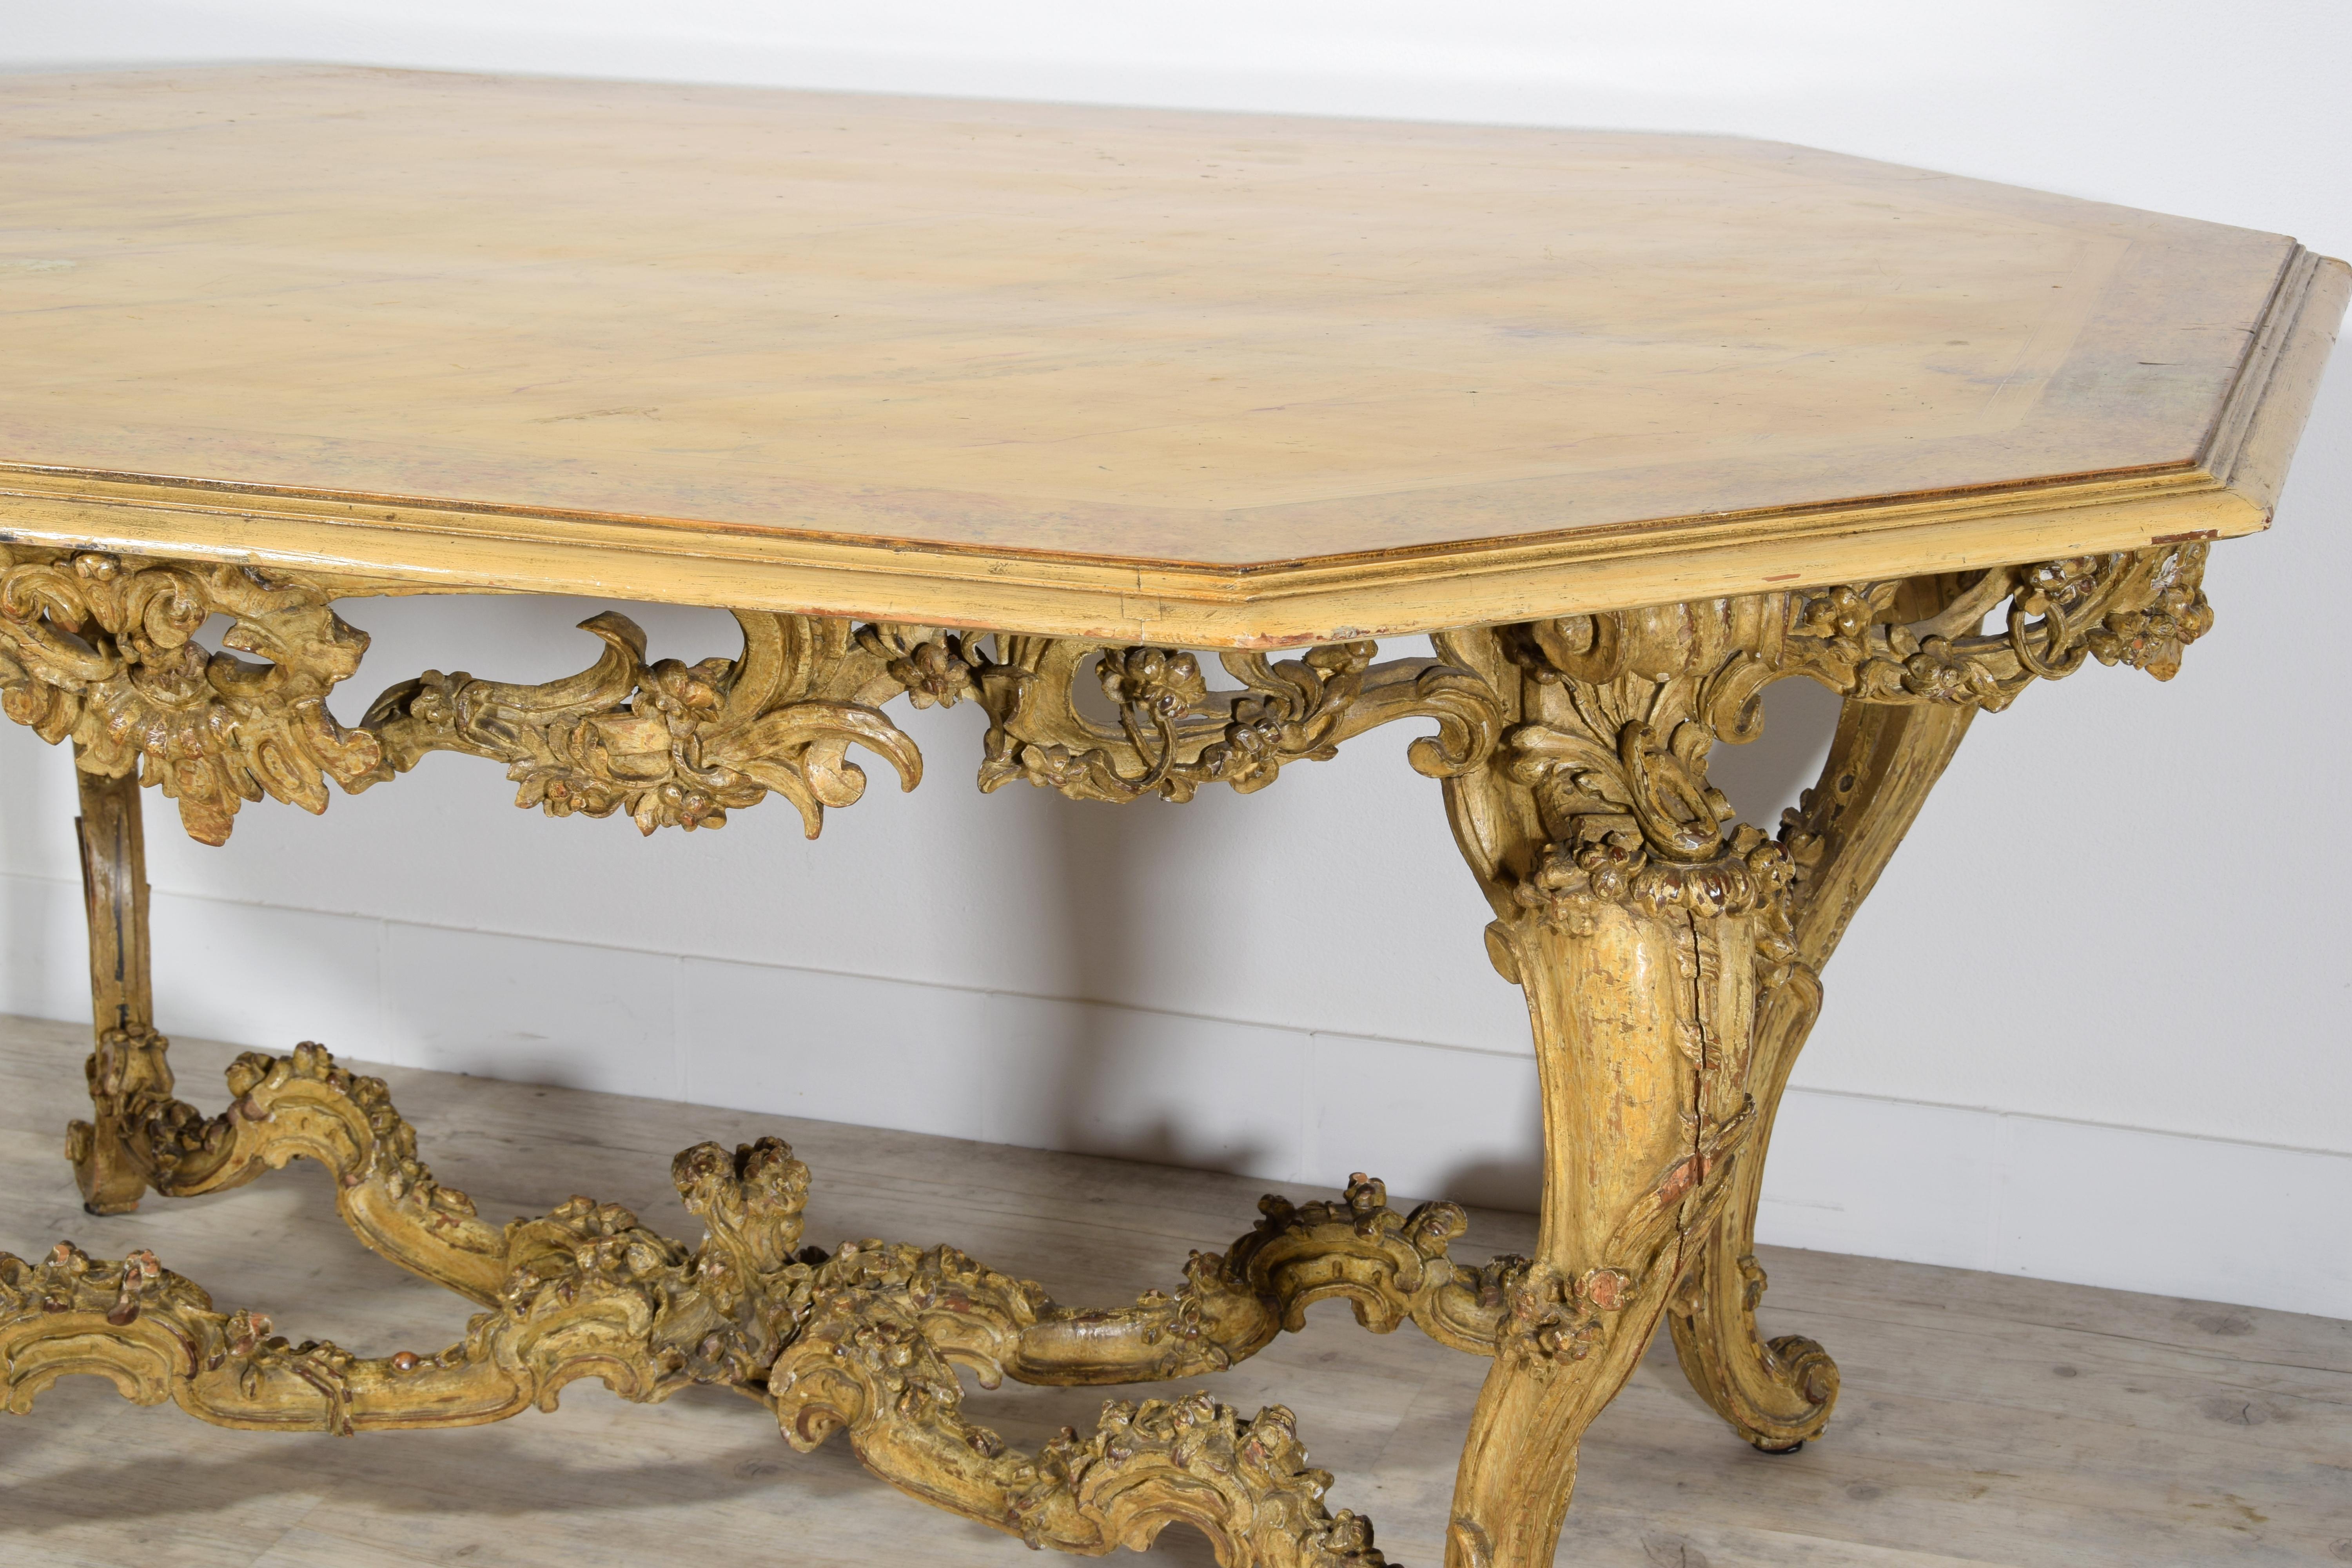 Italian Baroque Carved Gilt and Lacquered Wood Center Table, 18th Century 10